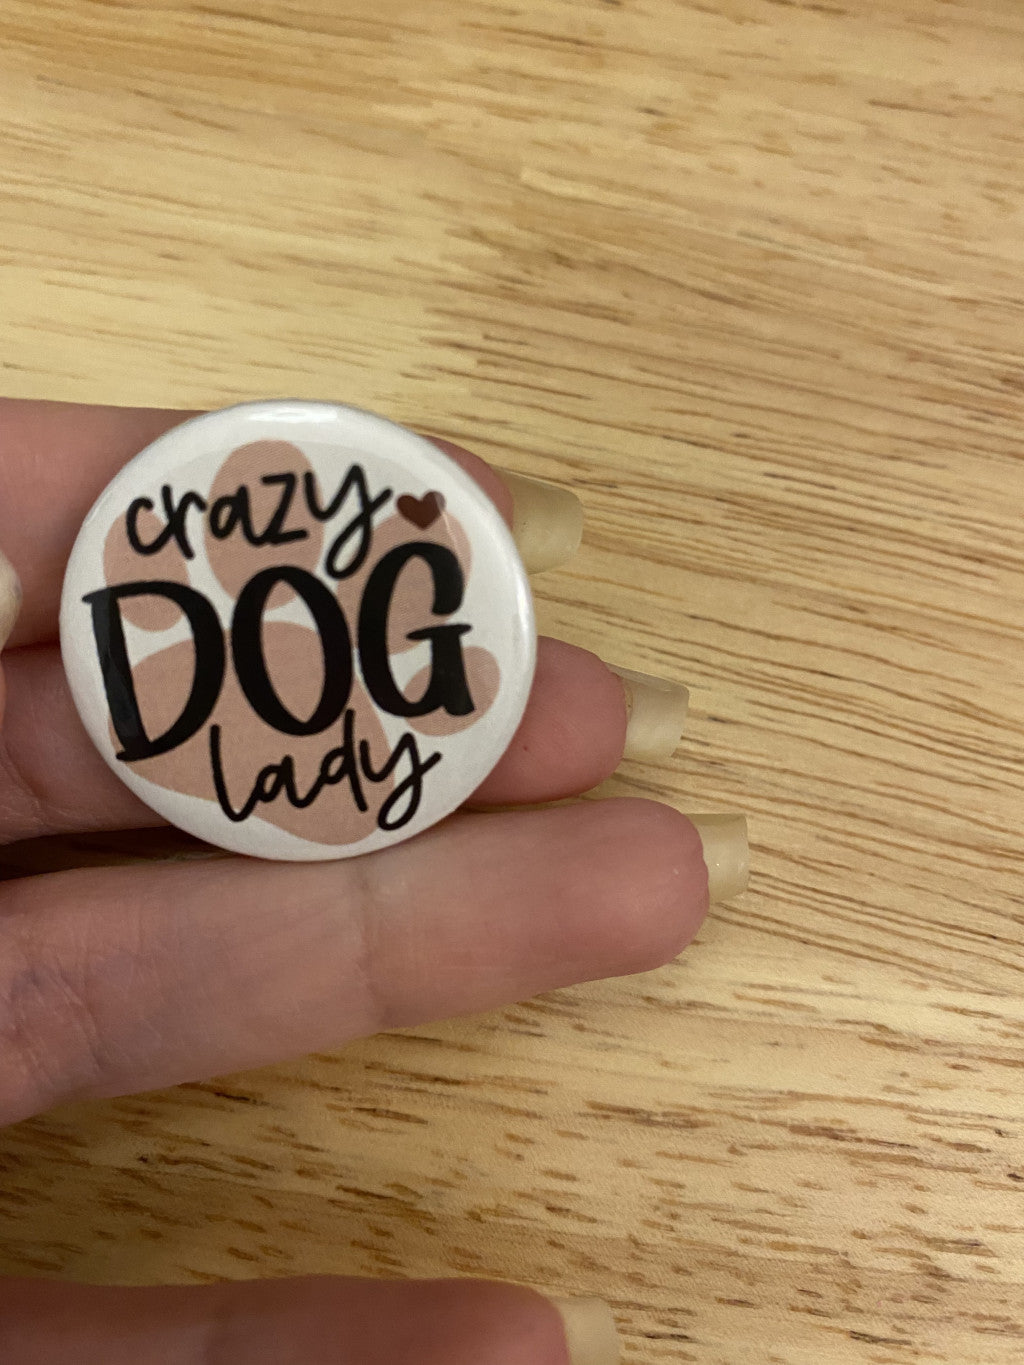 Crazy Dog Lady 1.25" / 2.25" Button Pin